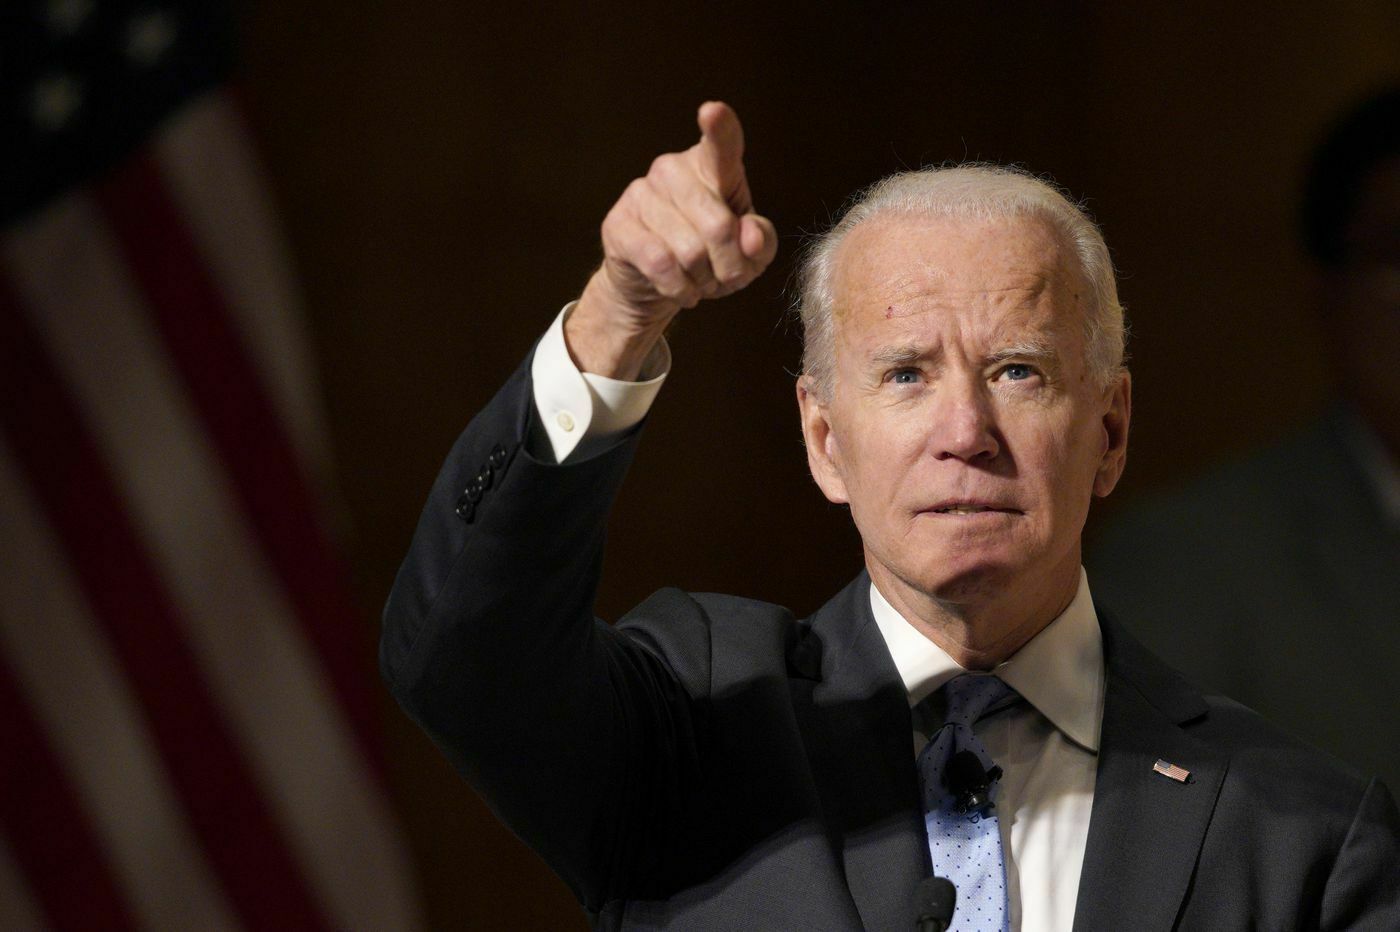 Biden called Russia the main threat to the United States